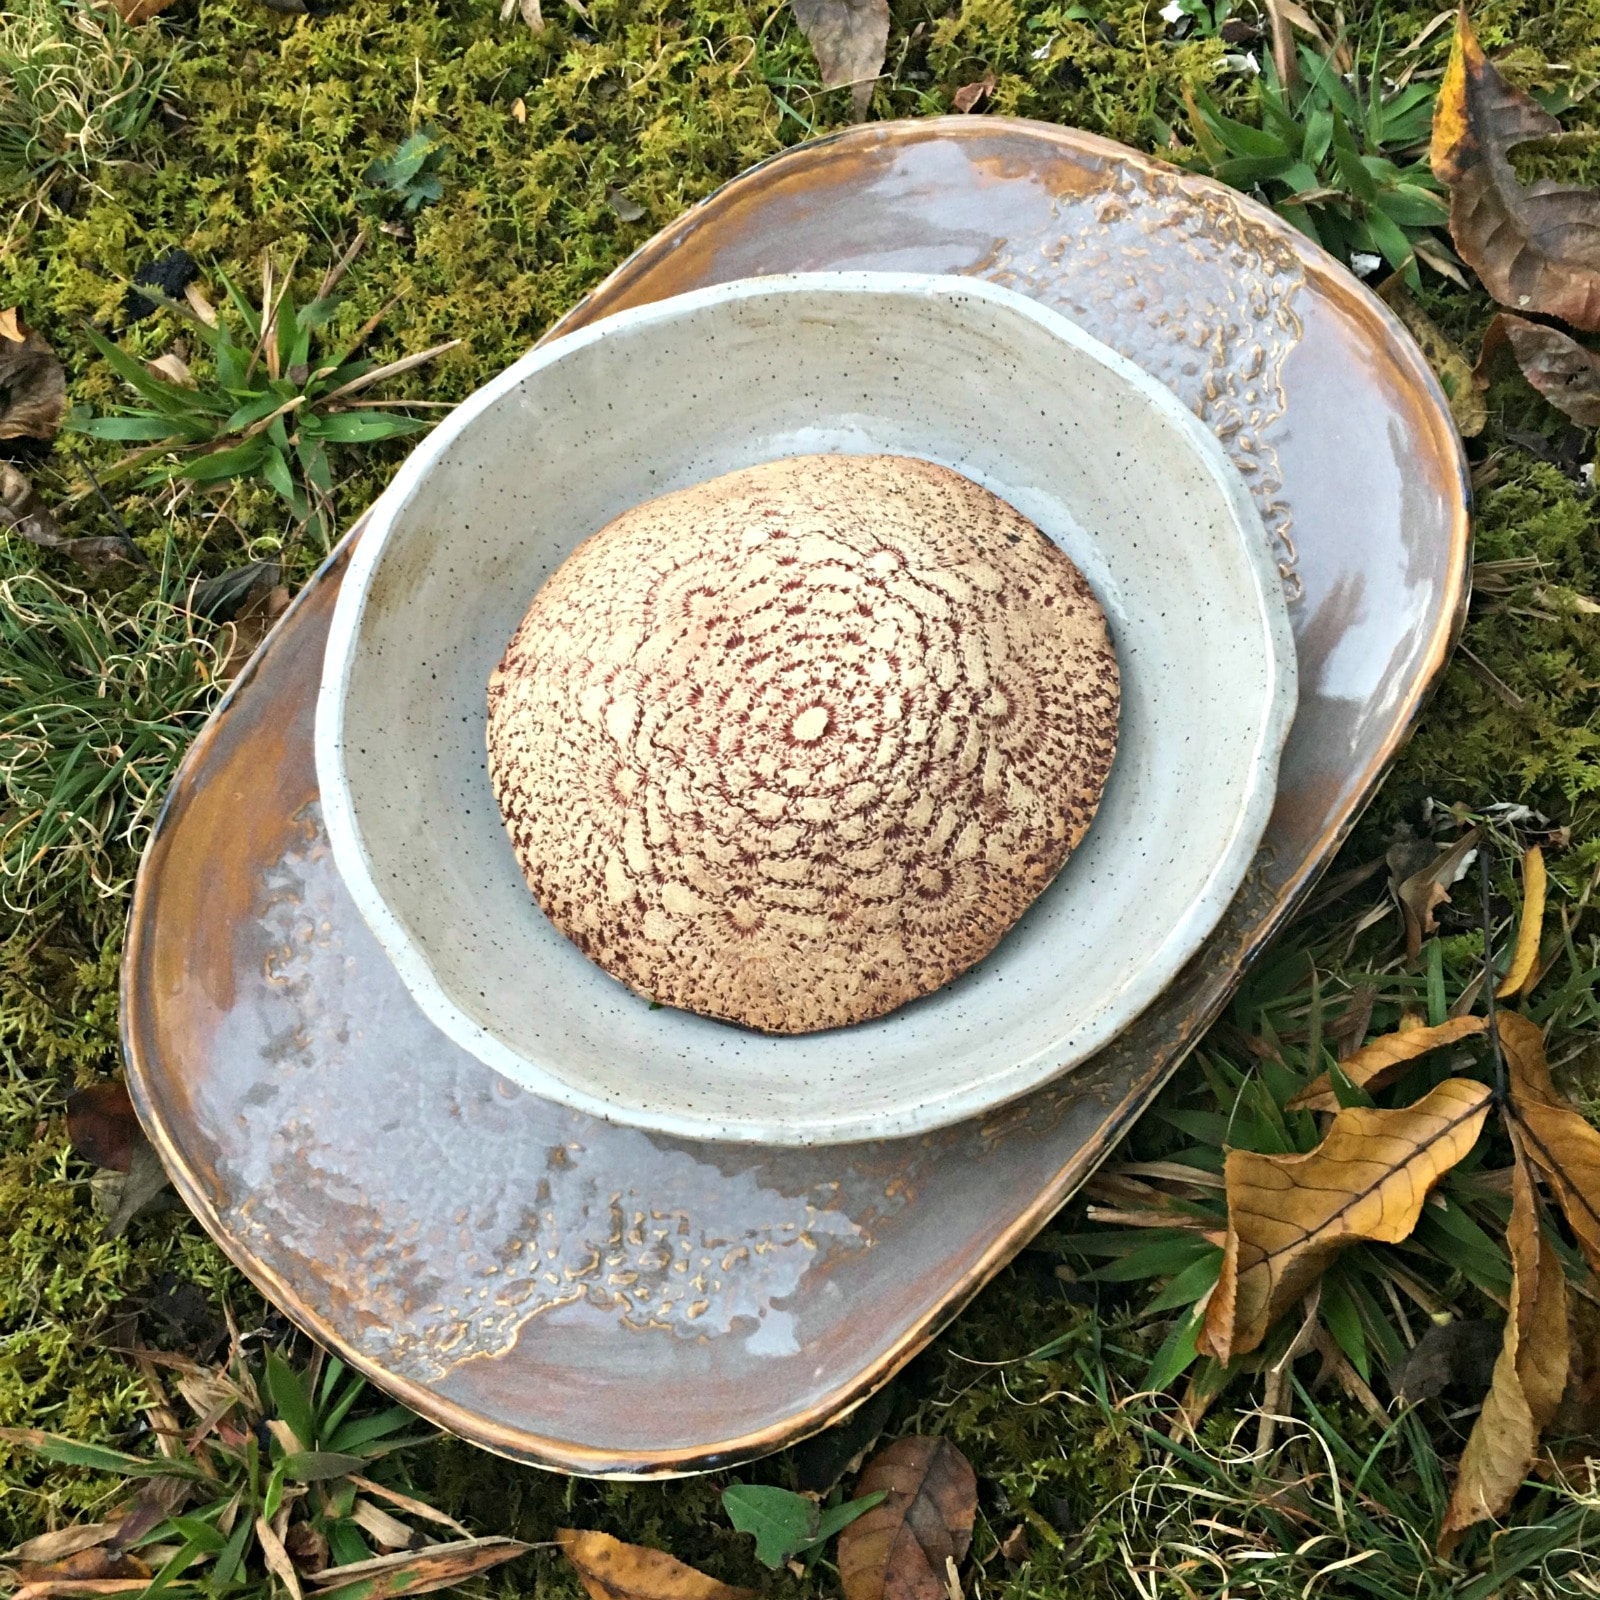 One of the Roebuck Springs potters, Jessica Sparks, enjoys playing with form and texture. 